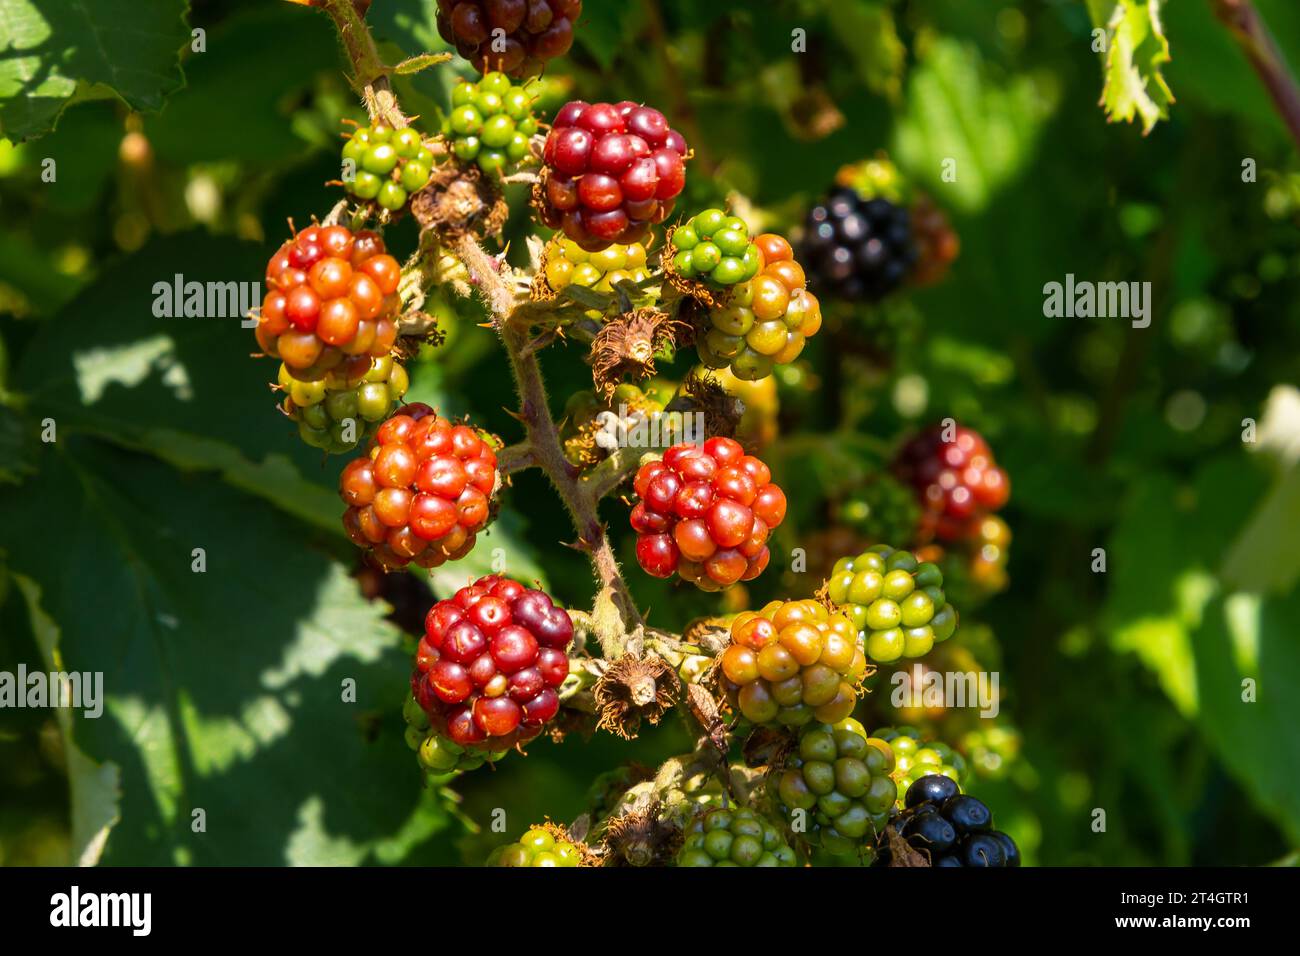 Black ripe and red ripening blackberries on green leaves background. Rubus fruticosus. Closeup of bramble branch with bunch of yummy sweet summer berr Stock Photo